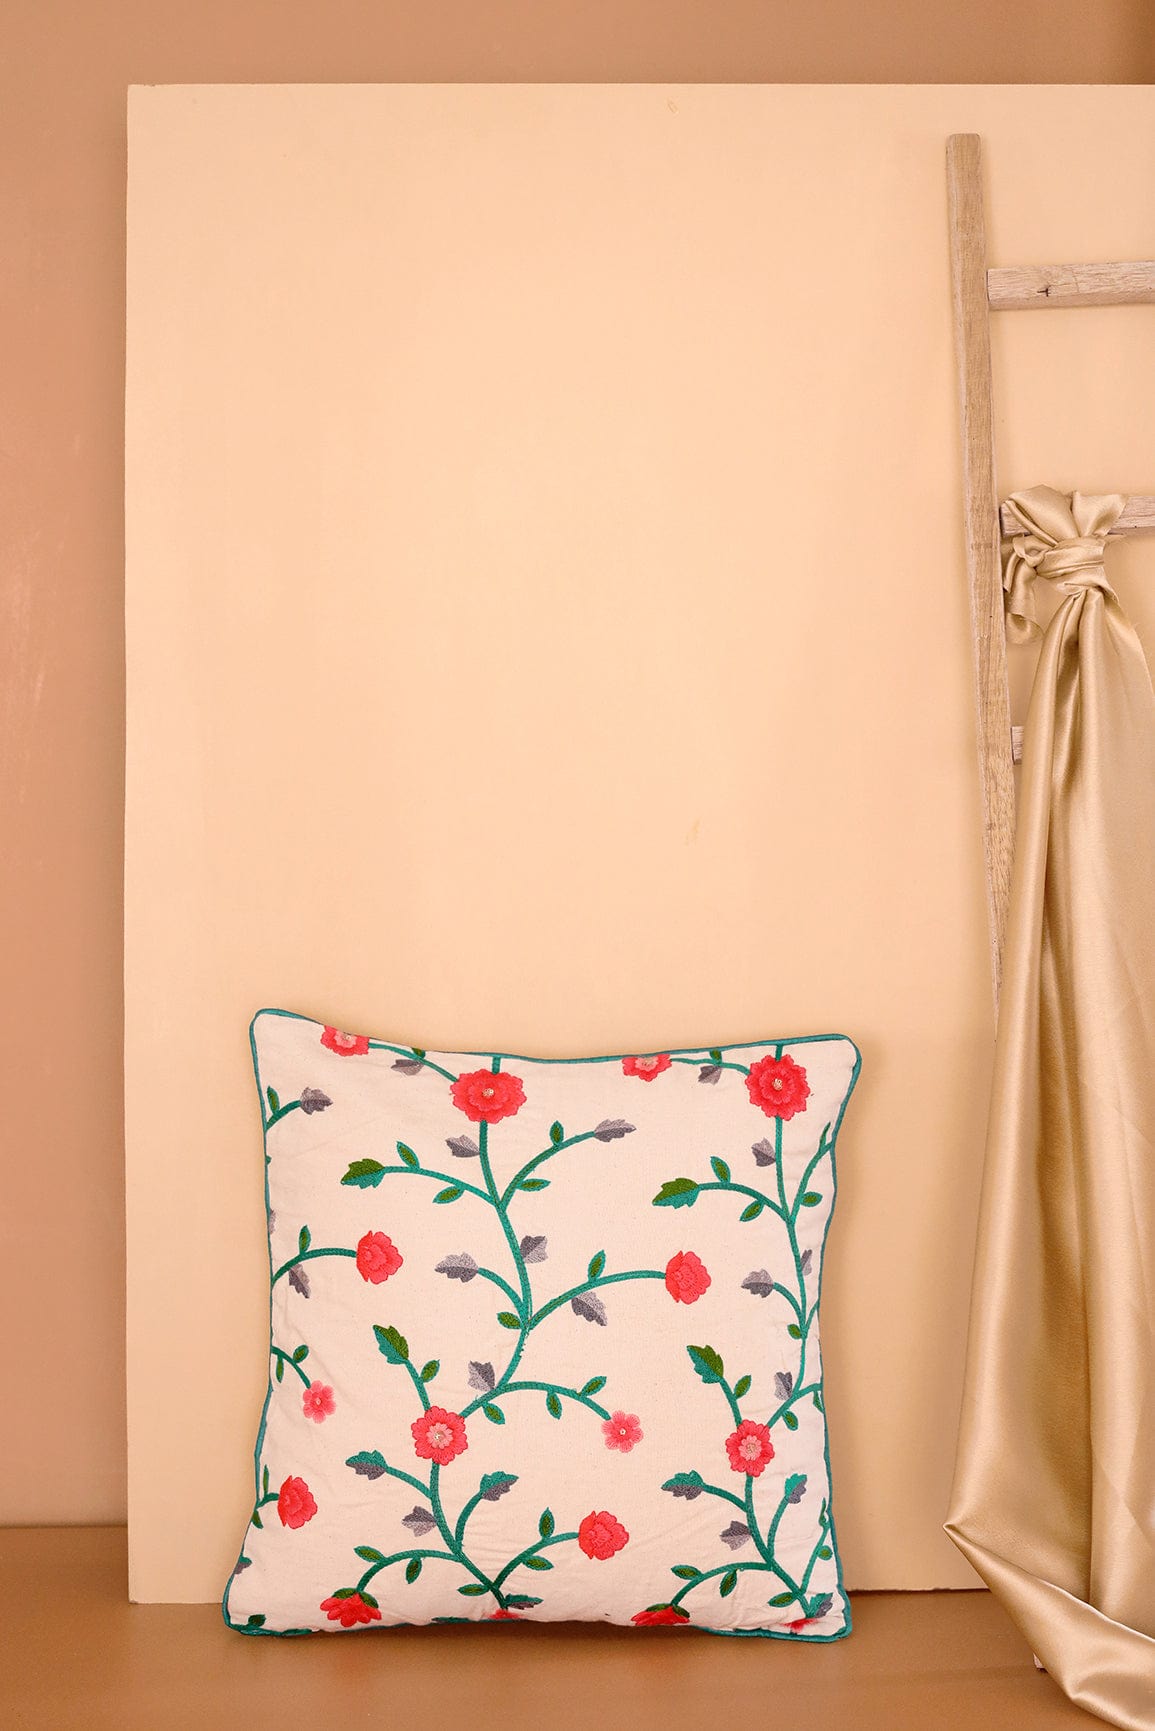 doeraa Pink and Green Floral Embroidery on Off White cotton Cushion Cover (16*16 inches)